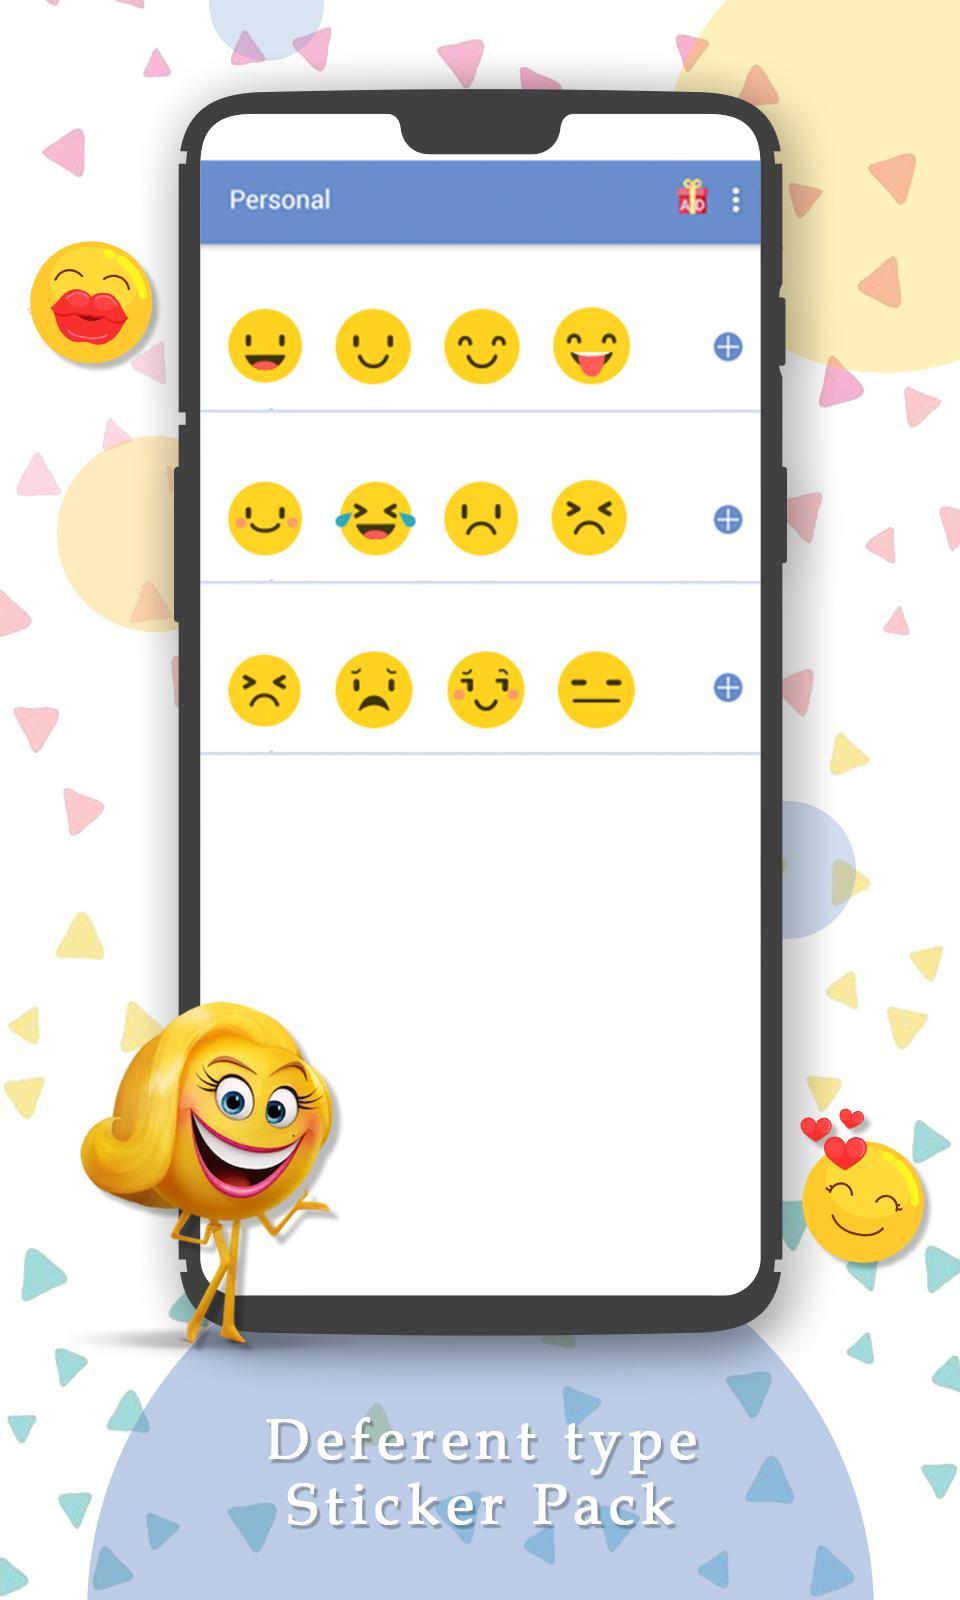 Emoticons Sticker Pack Wastickers Pack Whatsapp For Android